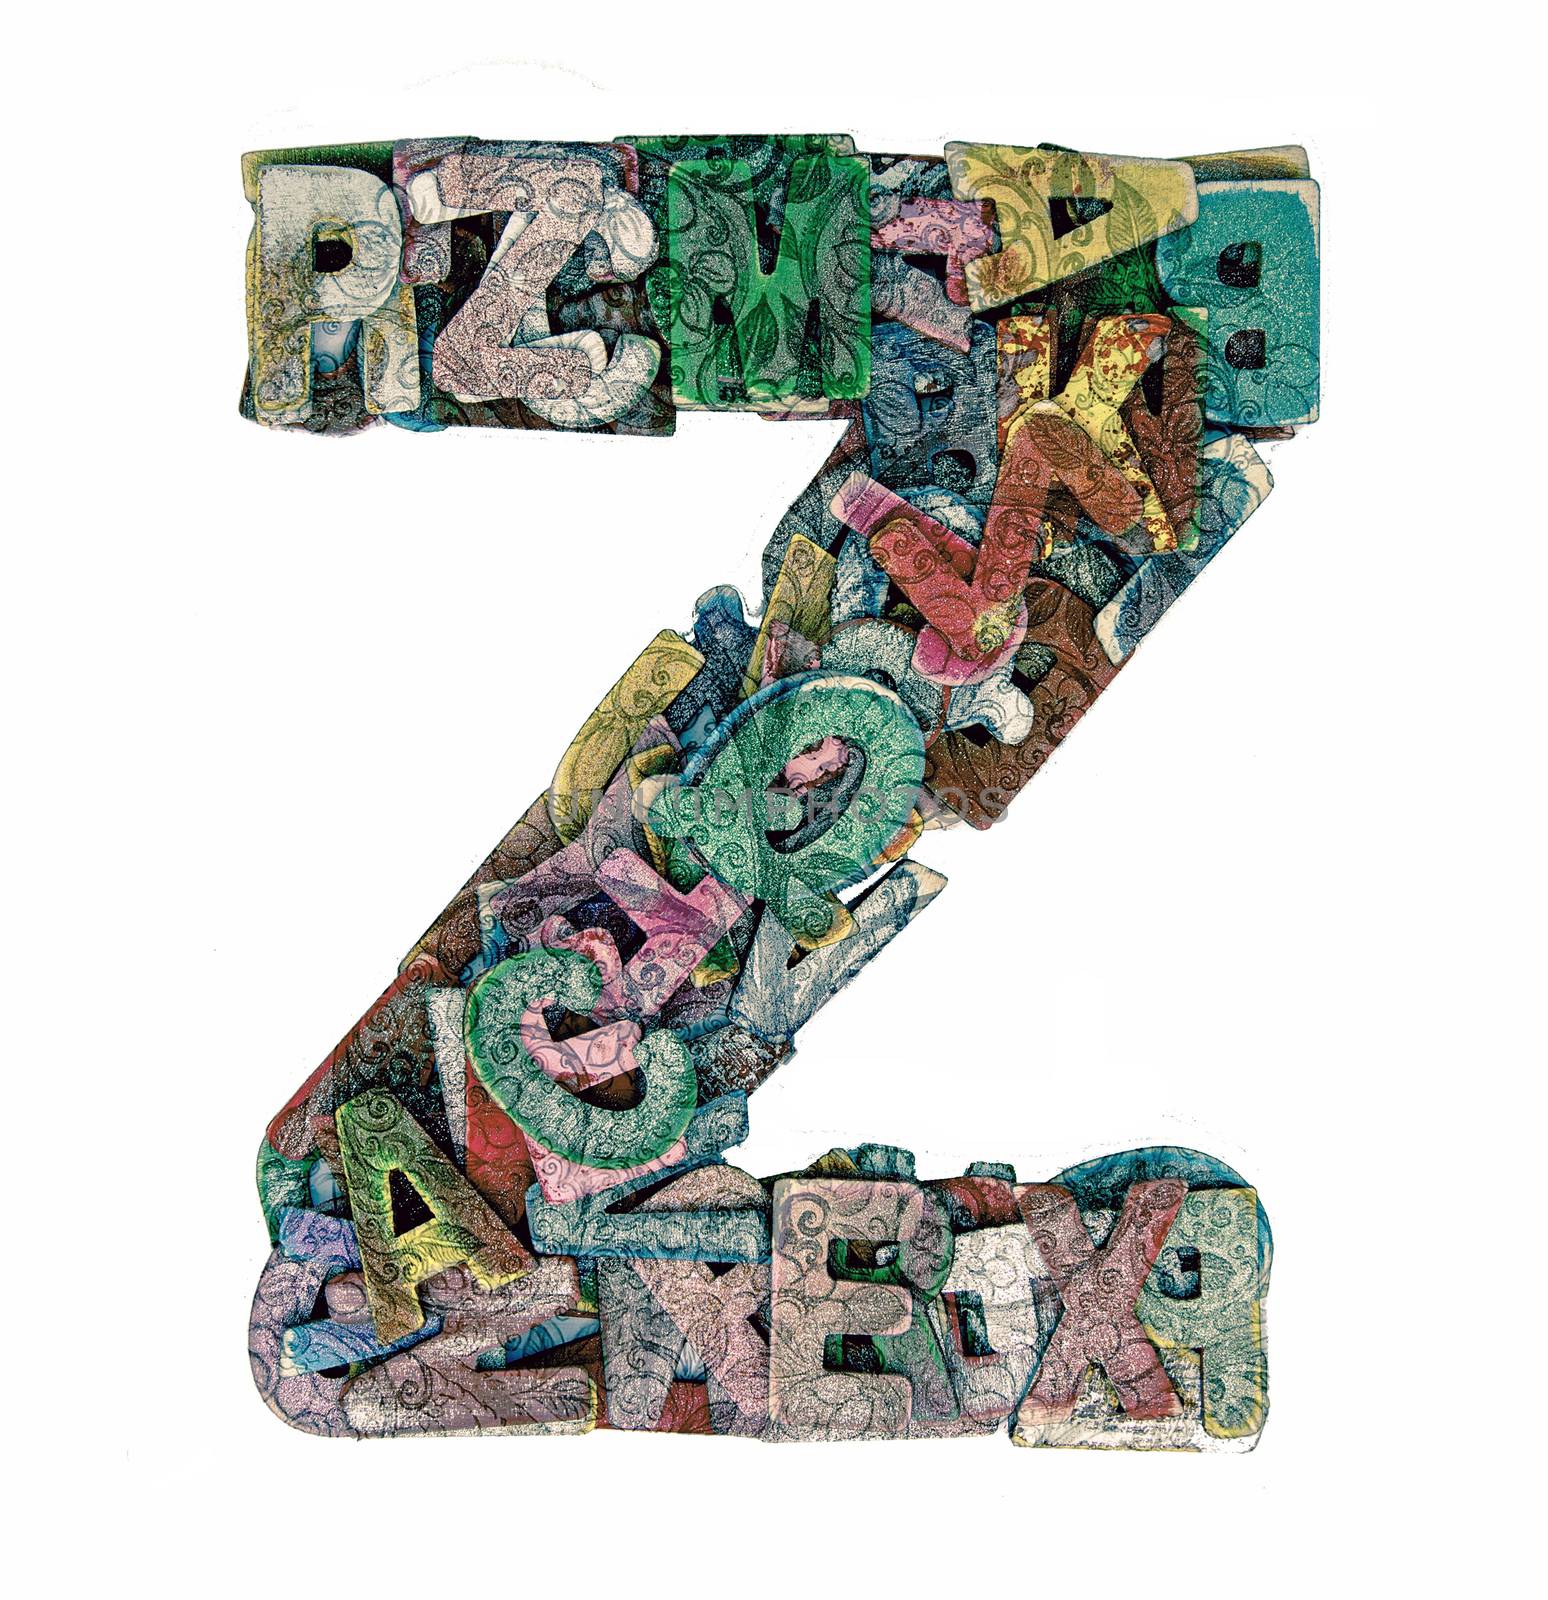 lots of small wooden letters to make up the letter ,Z